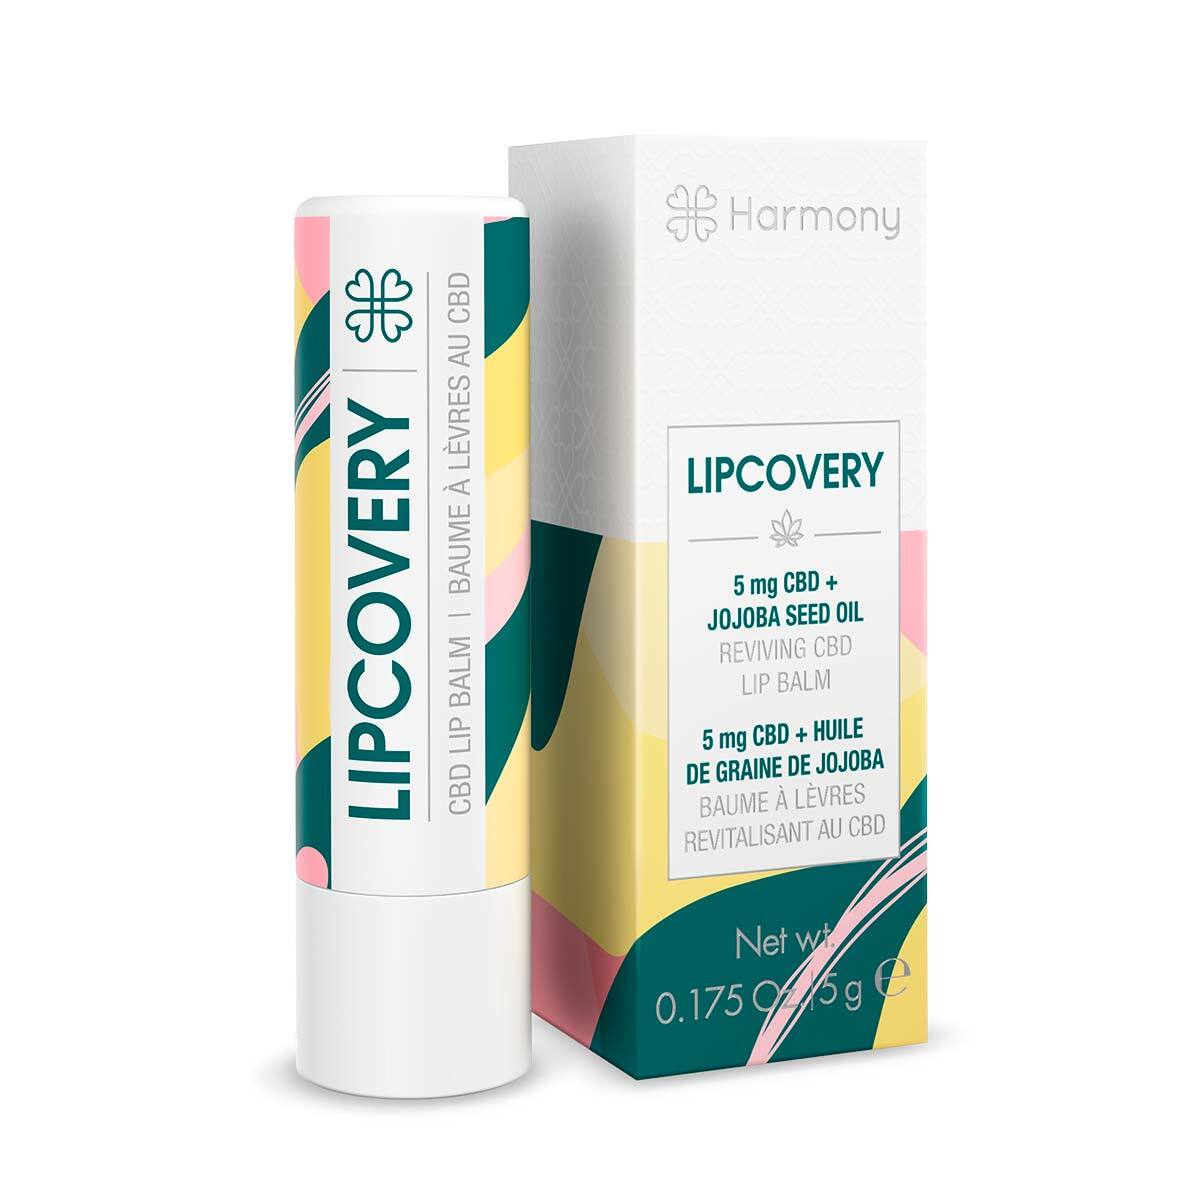 Ingredients_Baume_a_Levres_au_CBD - Lipcovery Harmony